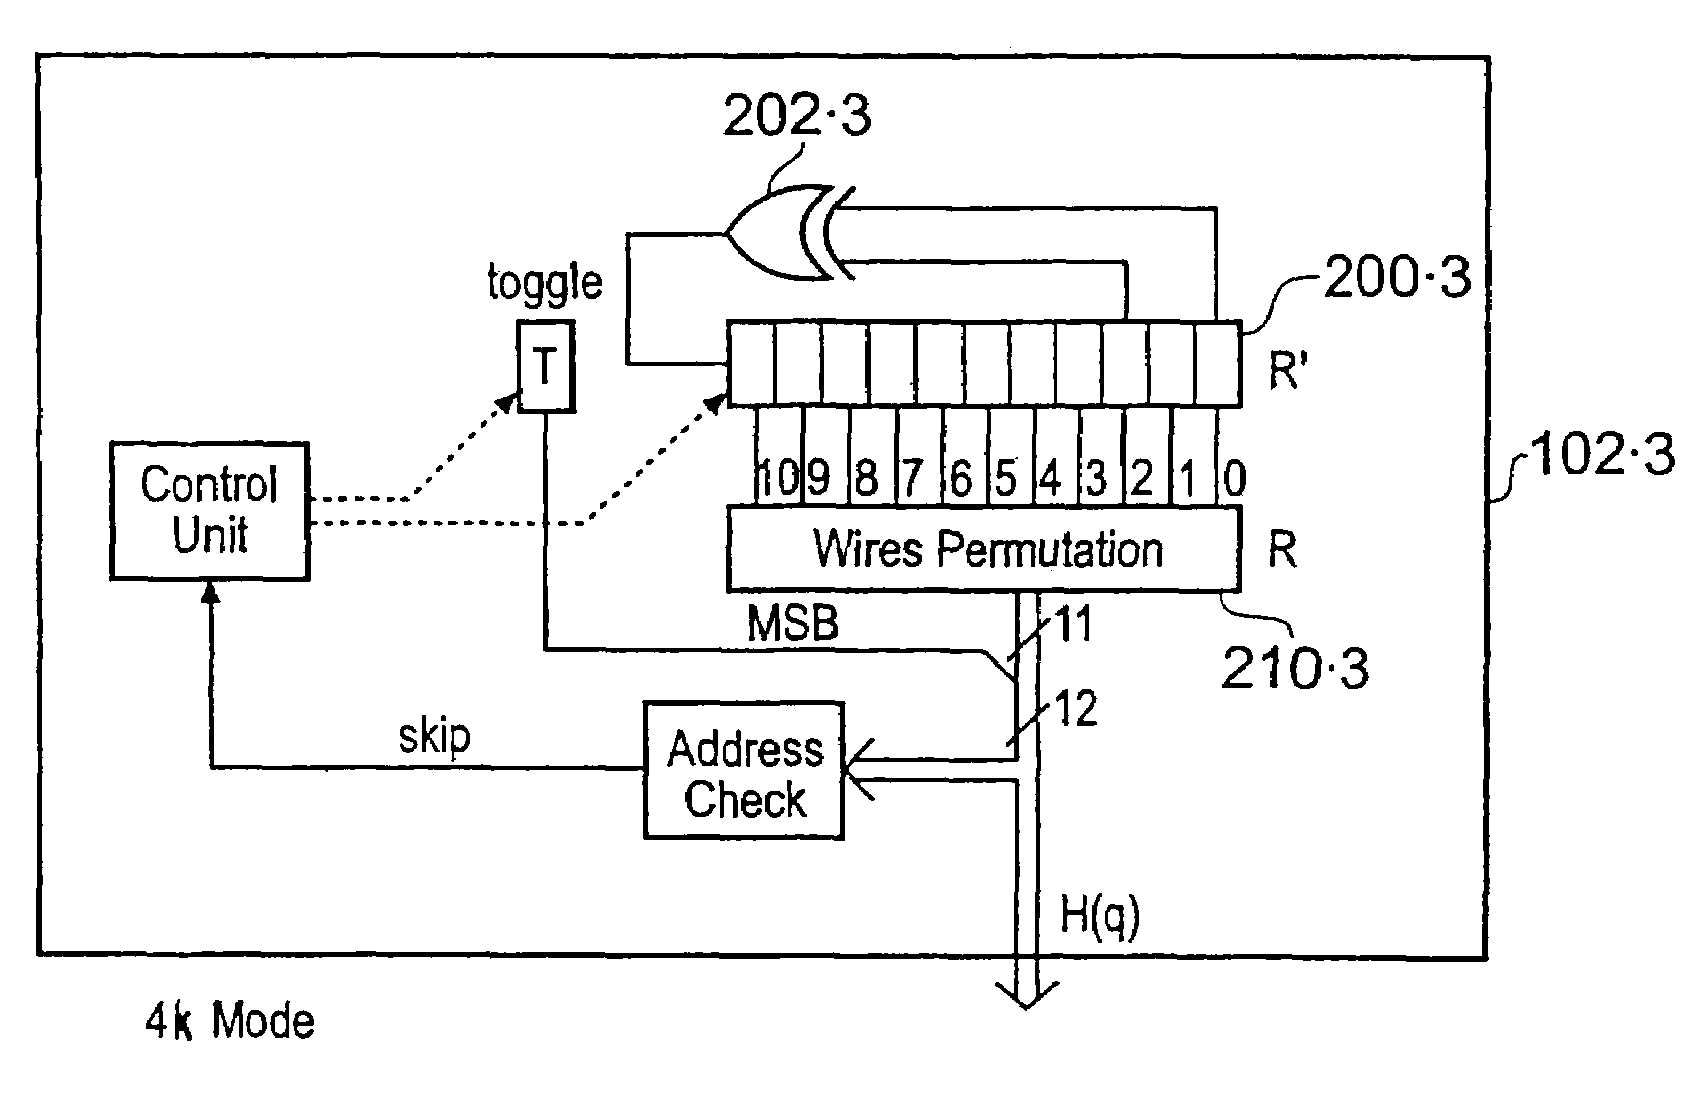 Data processing apparatus and method operable to map and de-map symbols and carrier signals of an Orthogonal Frequency Division Multiplexed (OFDM) symbol